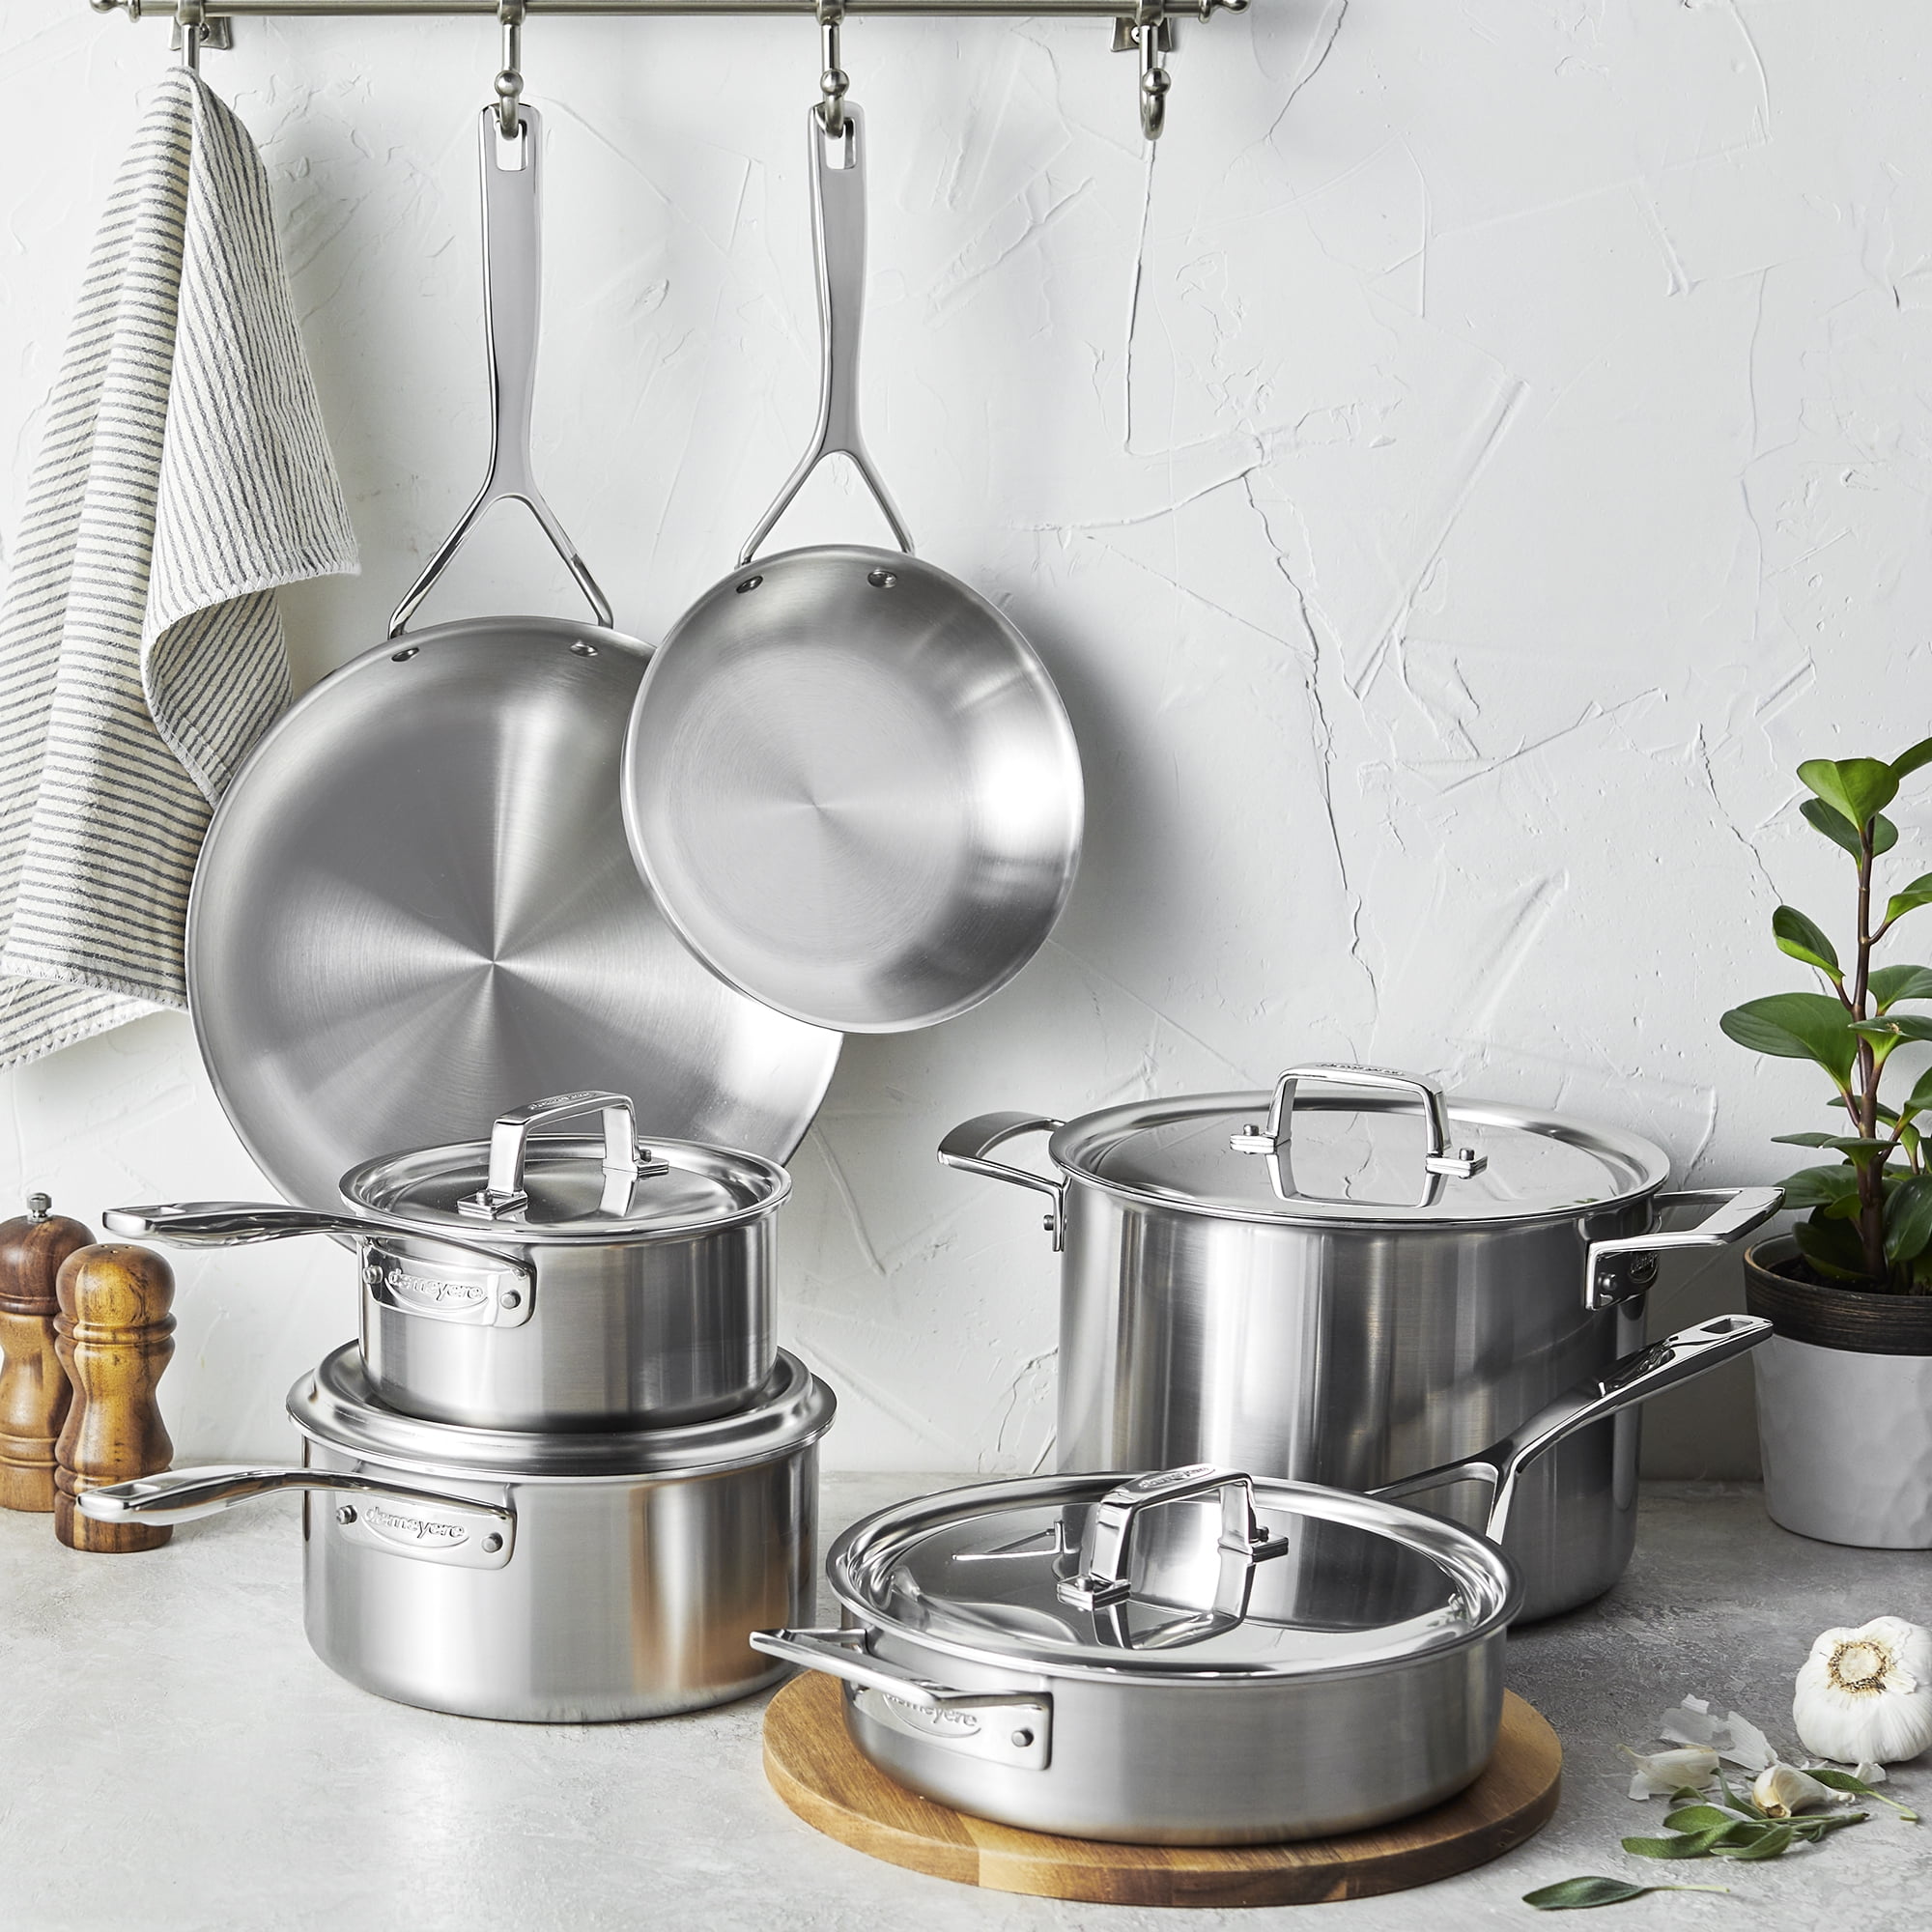 Demeyere 5-Plus 10-Pc. Stainless Steel Cookware Set - Macy's